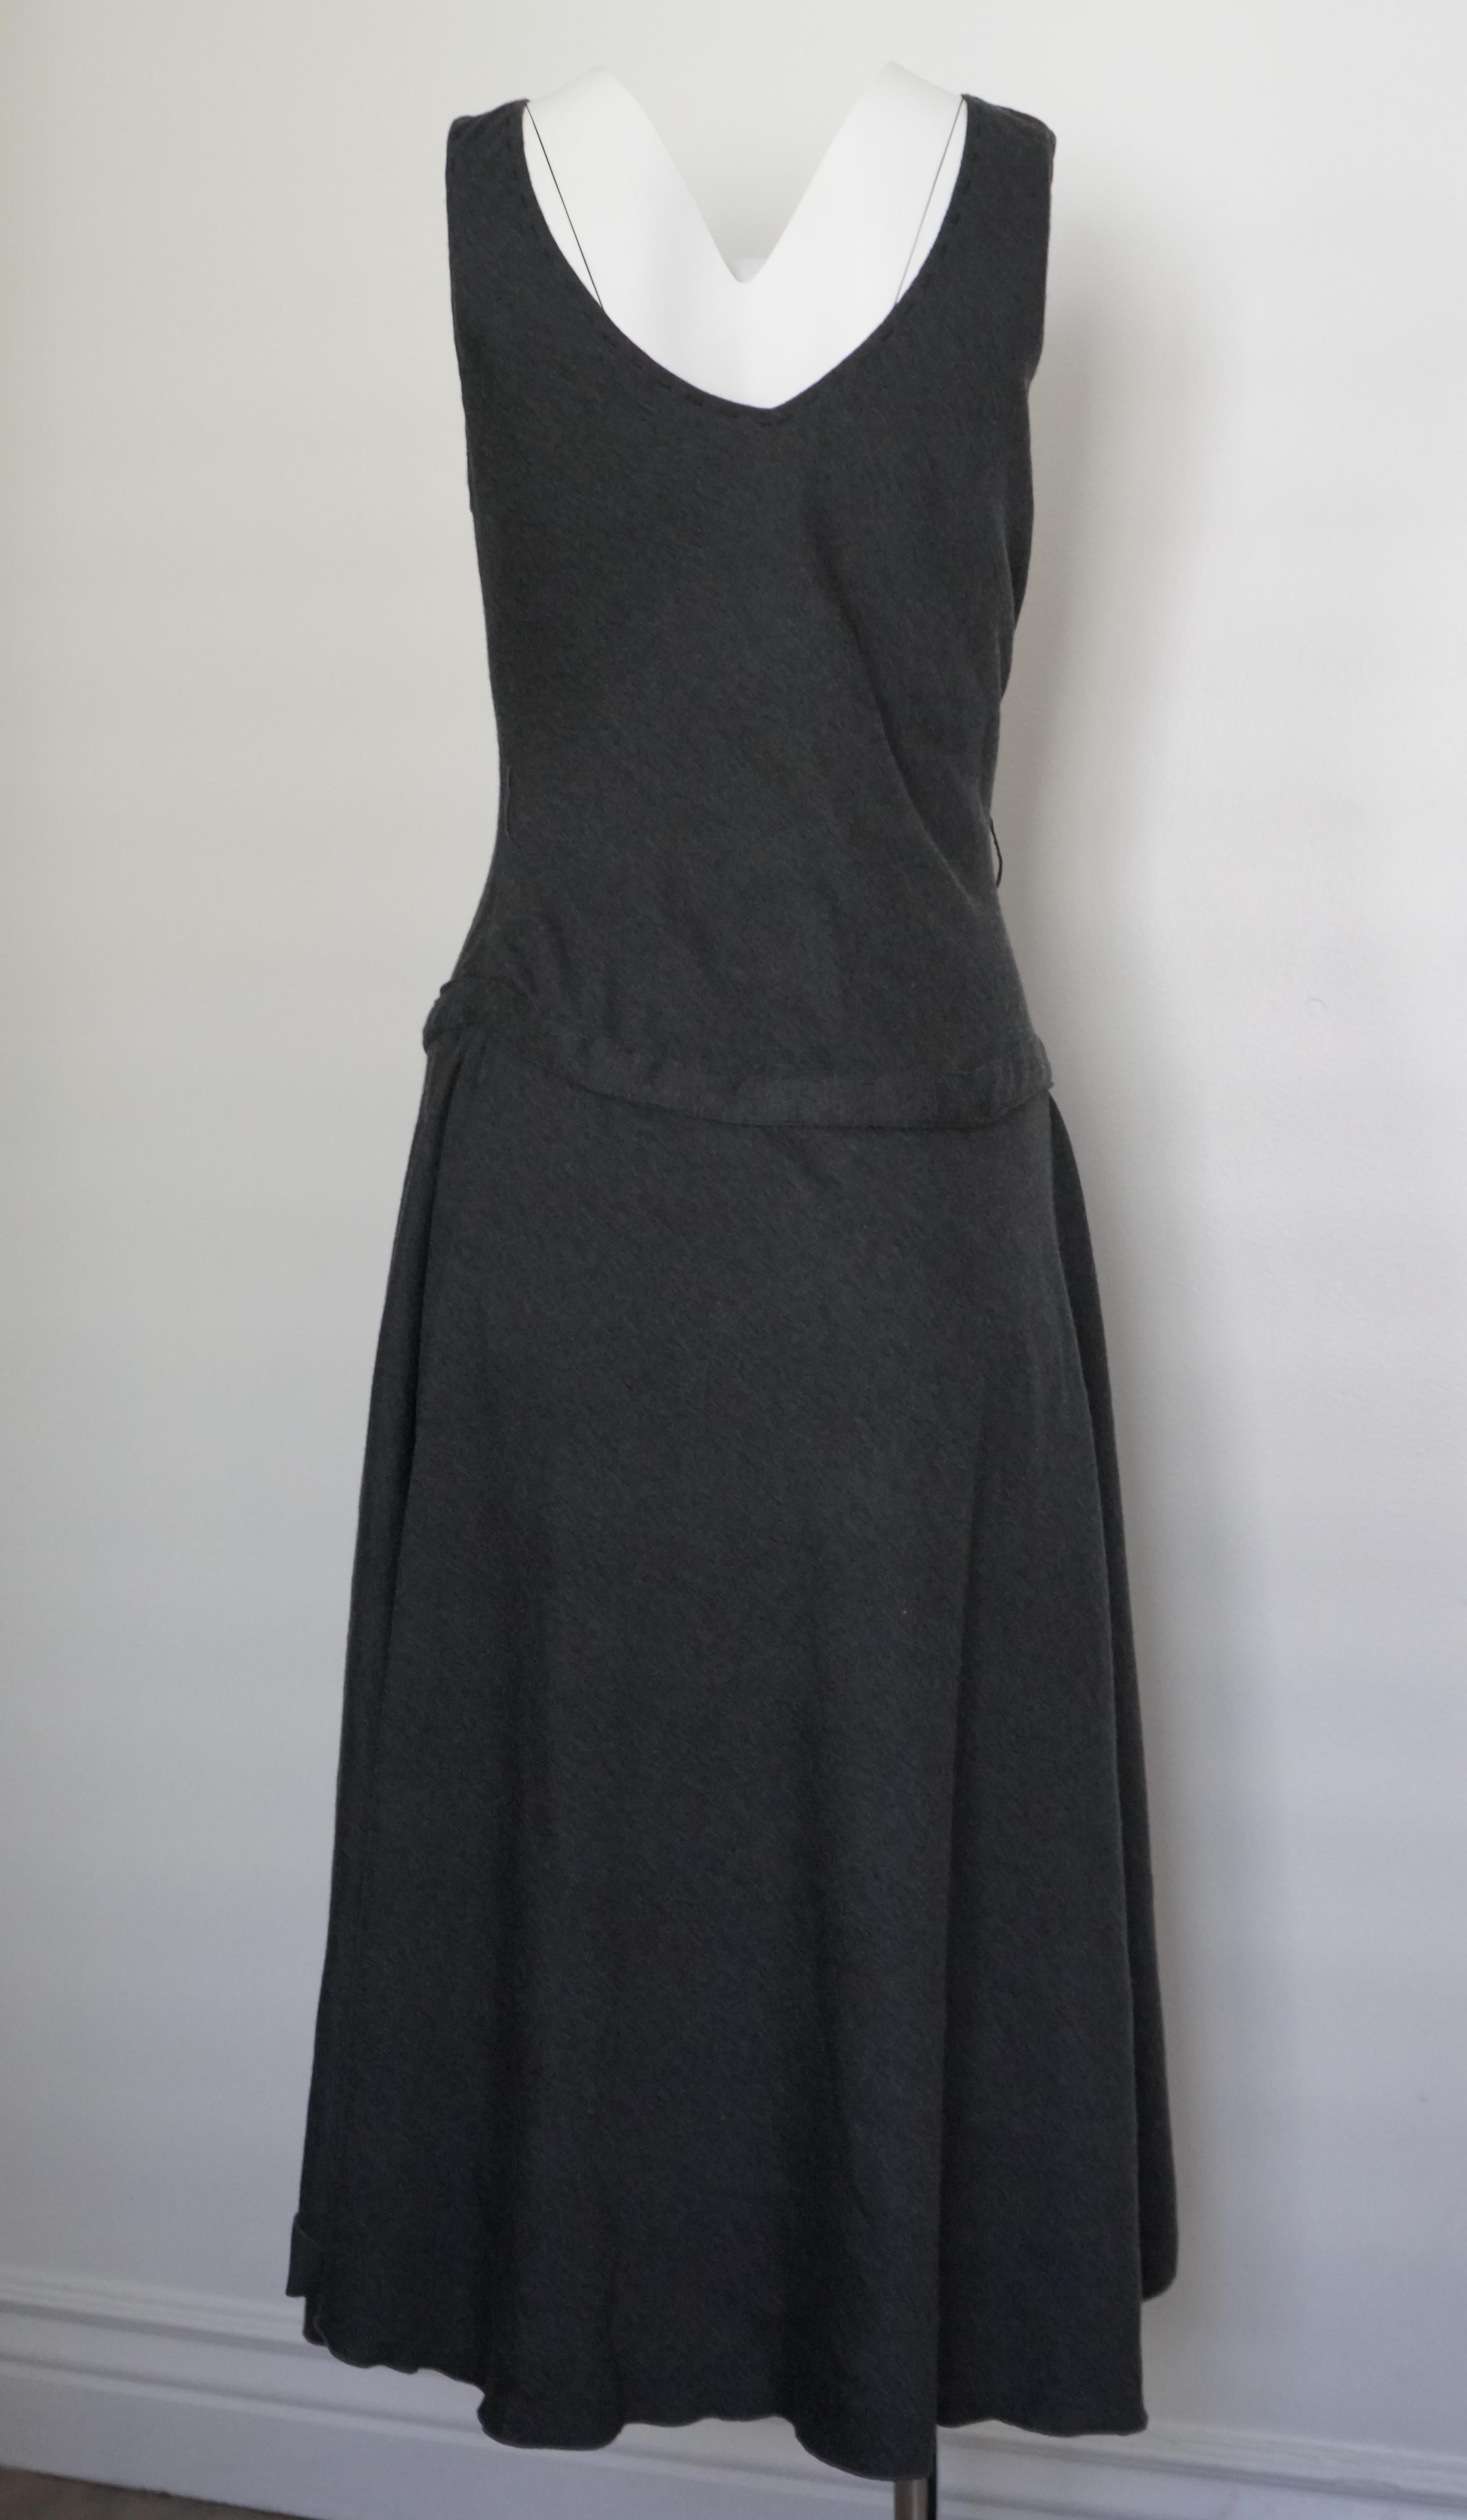 Stretch fabric
V-neck
Midi length
Ruching in the front 
Has belt loops, but no belt
Size 44
Total length 48 inches